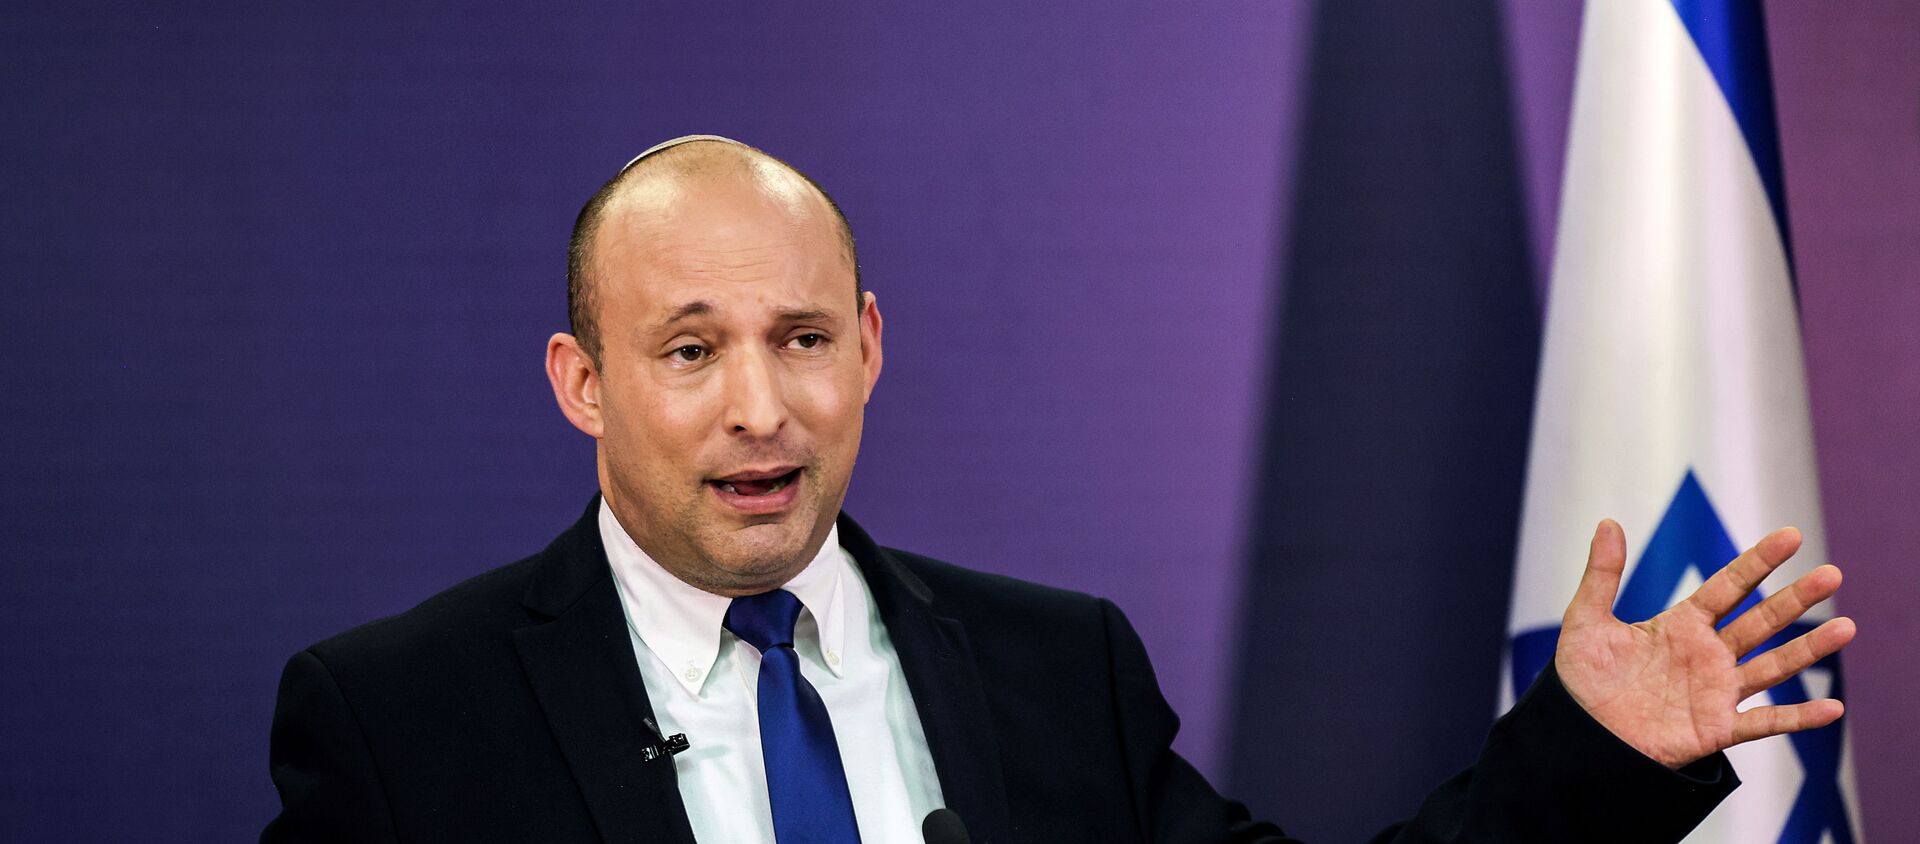 Naftali Bennett, Israeli parliament member from the Yamina party, gestures as he gives a statement at the Knesset, Israel's parliament, in Jerusalem, June 6, 2021 - Sputnik International, 1920